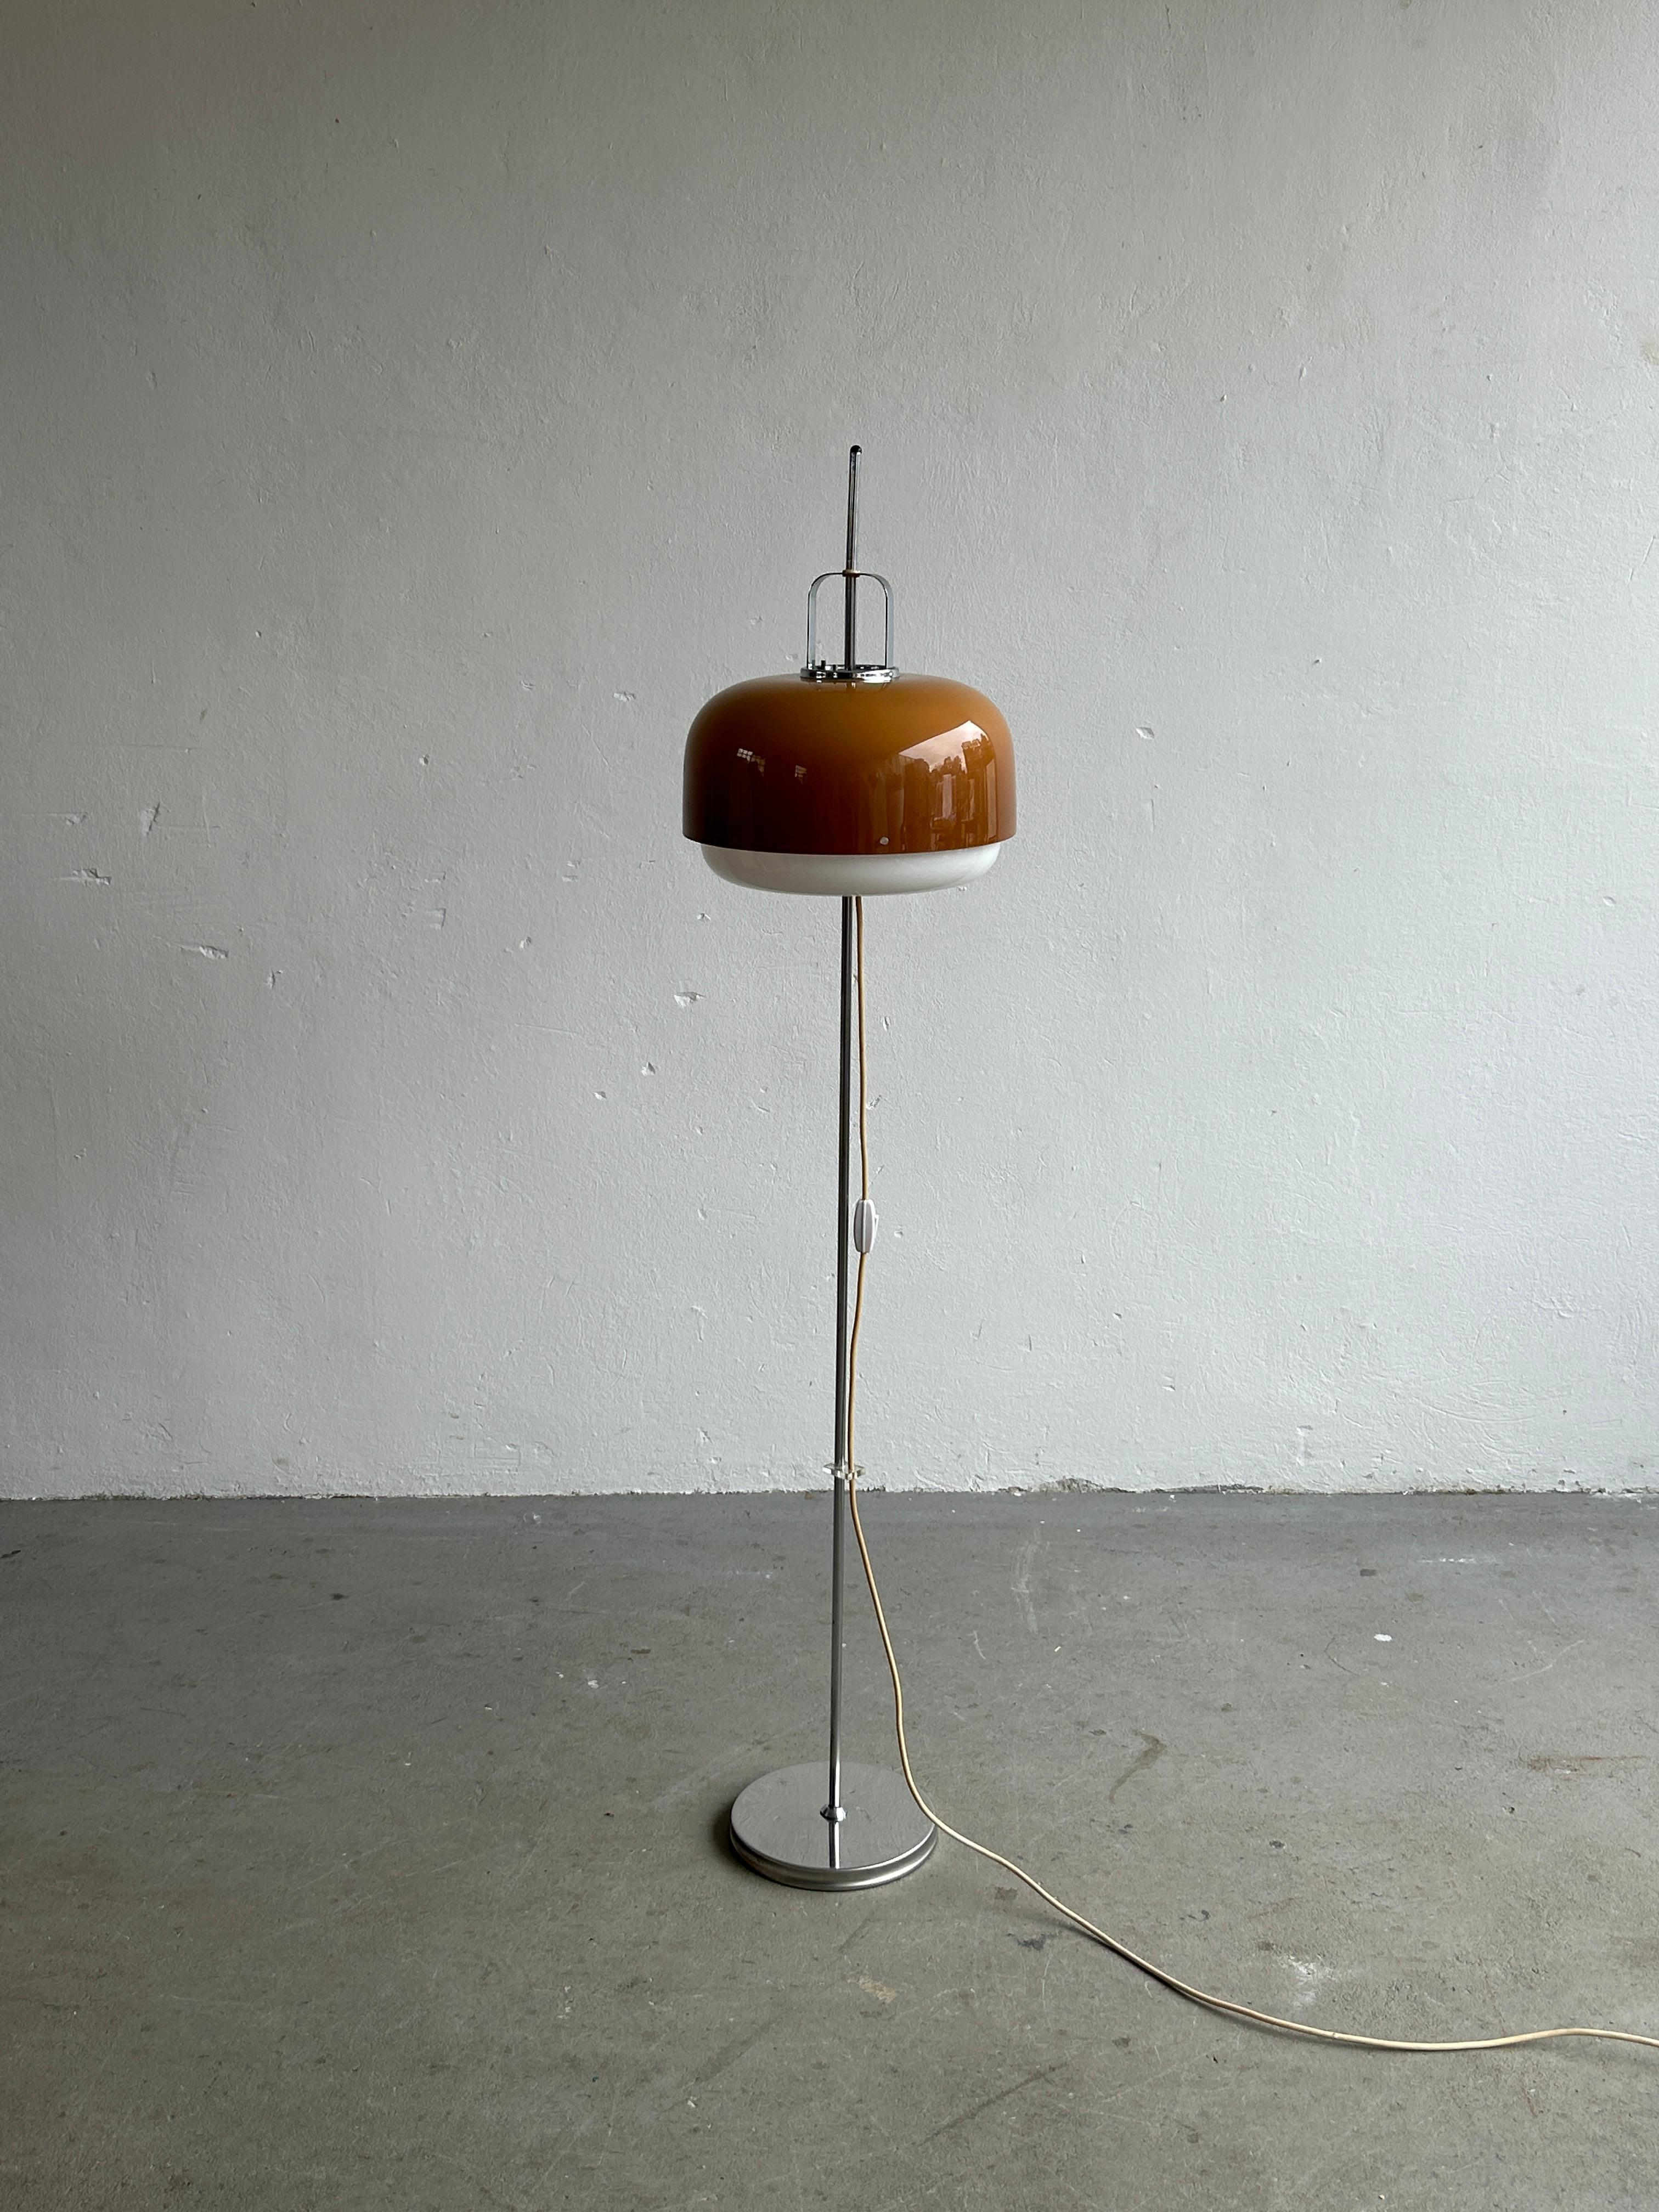 A beautiful brown and white midcentury floor lamp designed by Harvey Guzzini Studio for Meblo in the 1970s. Made from chromed metal and plastic. Can be adjusted to any height.

The item is very well preserved, in very good and original vintage